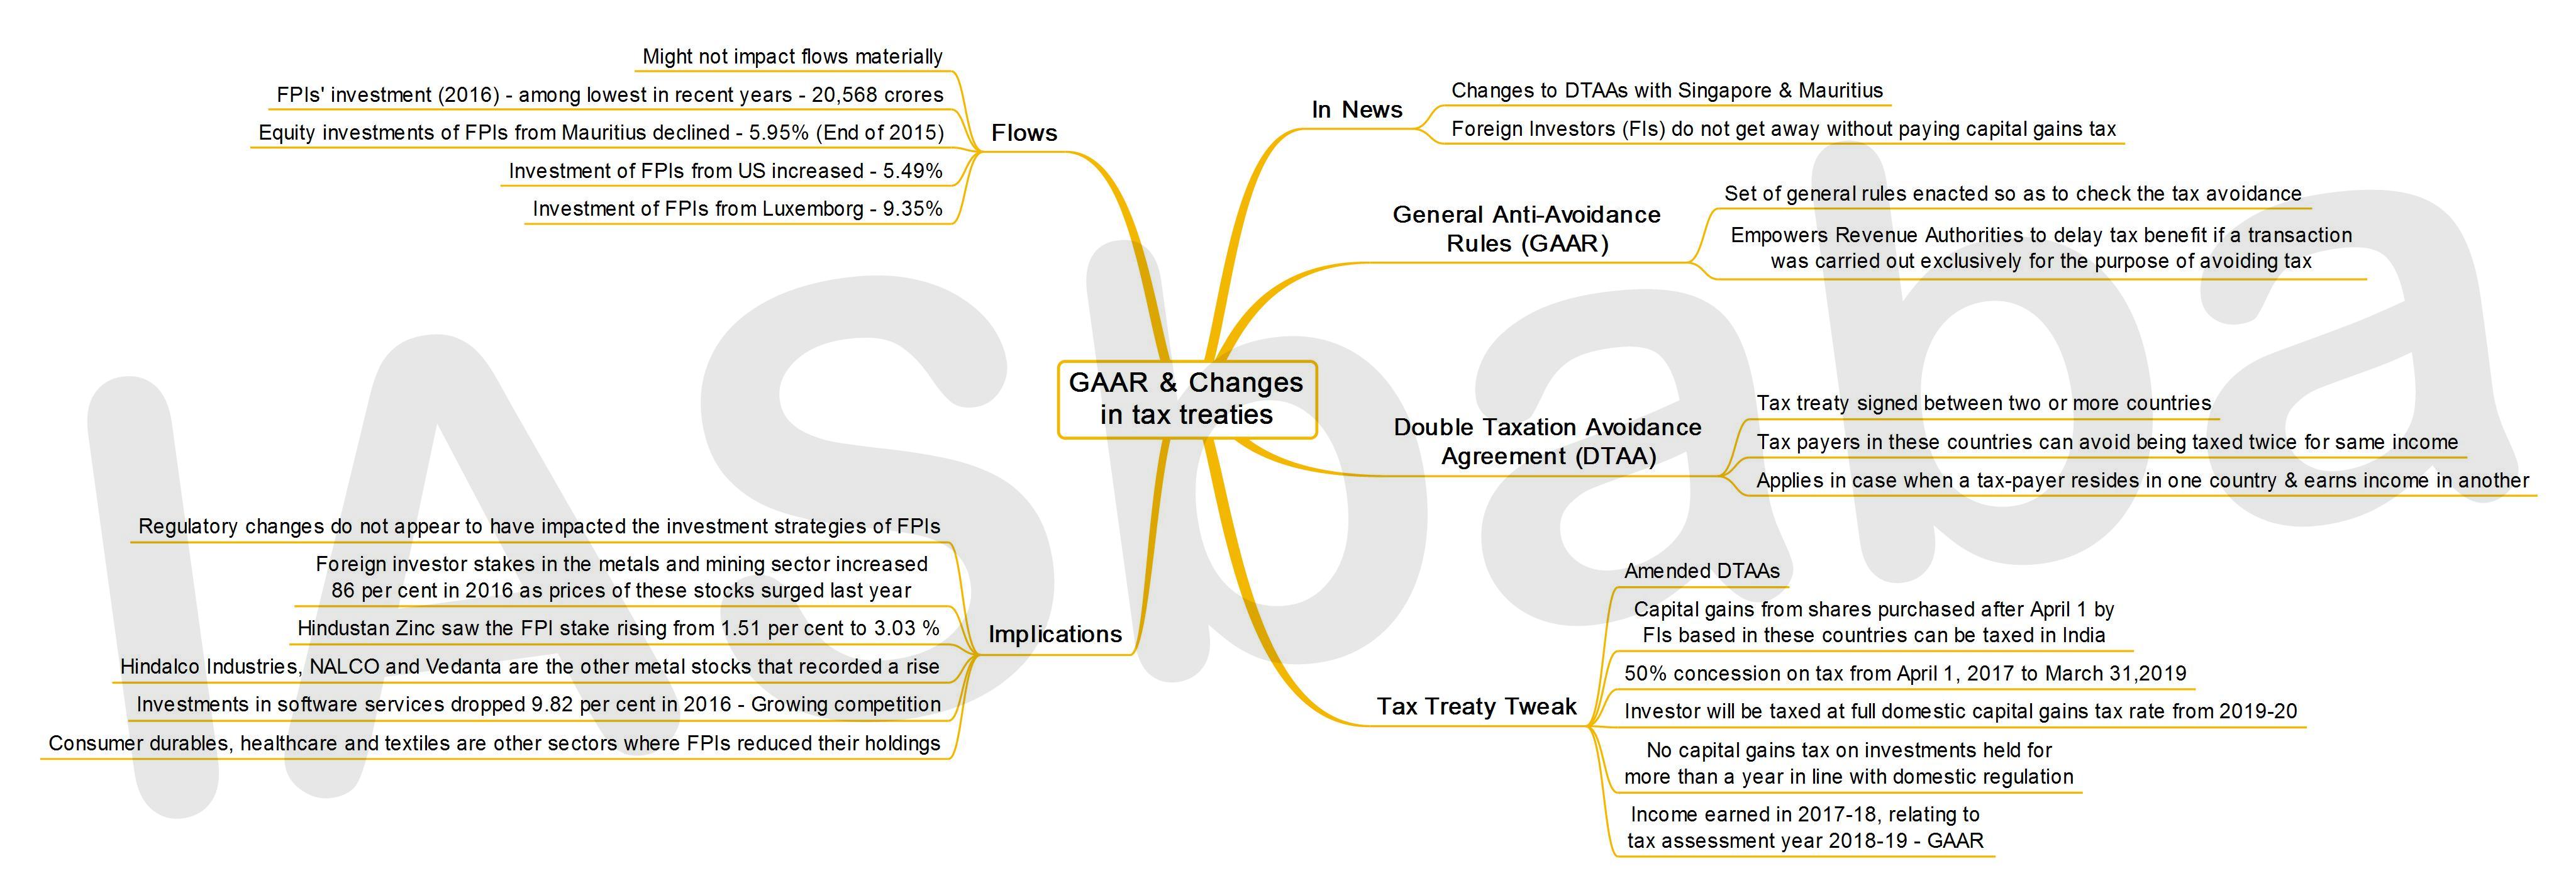 IASbaba's Mind Map GAAR & Changes in Tax Treaties - Issue, 25th January